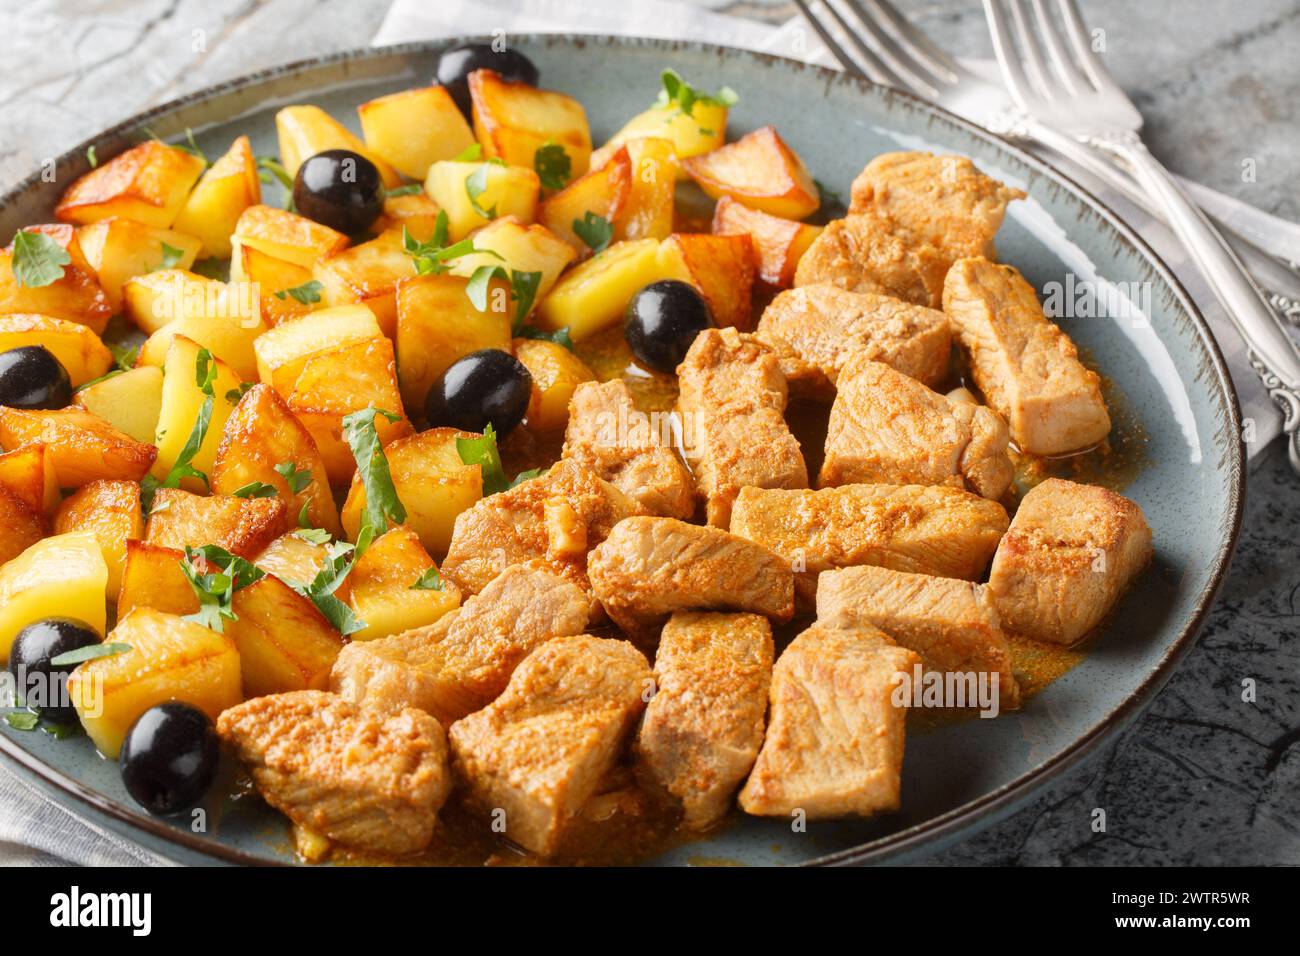 Rojoes Portuguese dish of fried pork cubes and potatoes closeup on the plate on the table. Horizontal Stock Photo